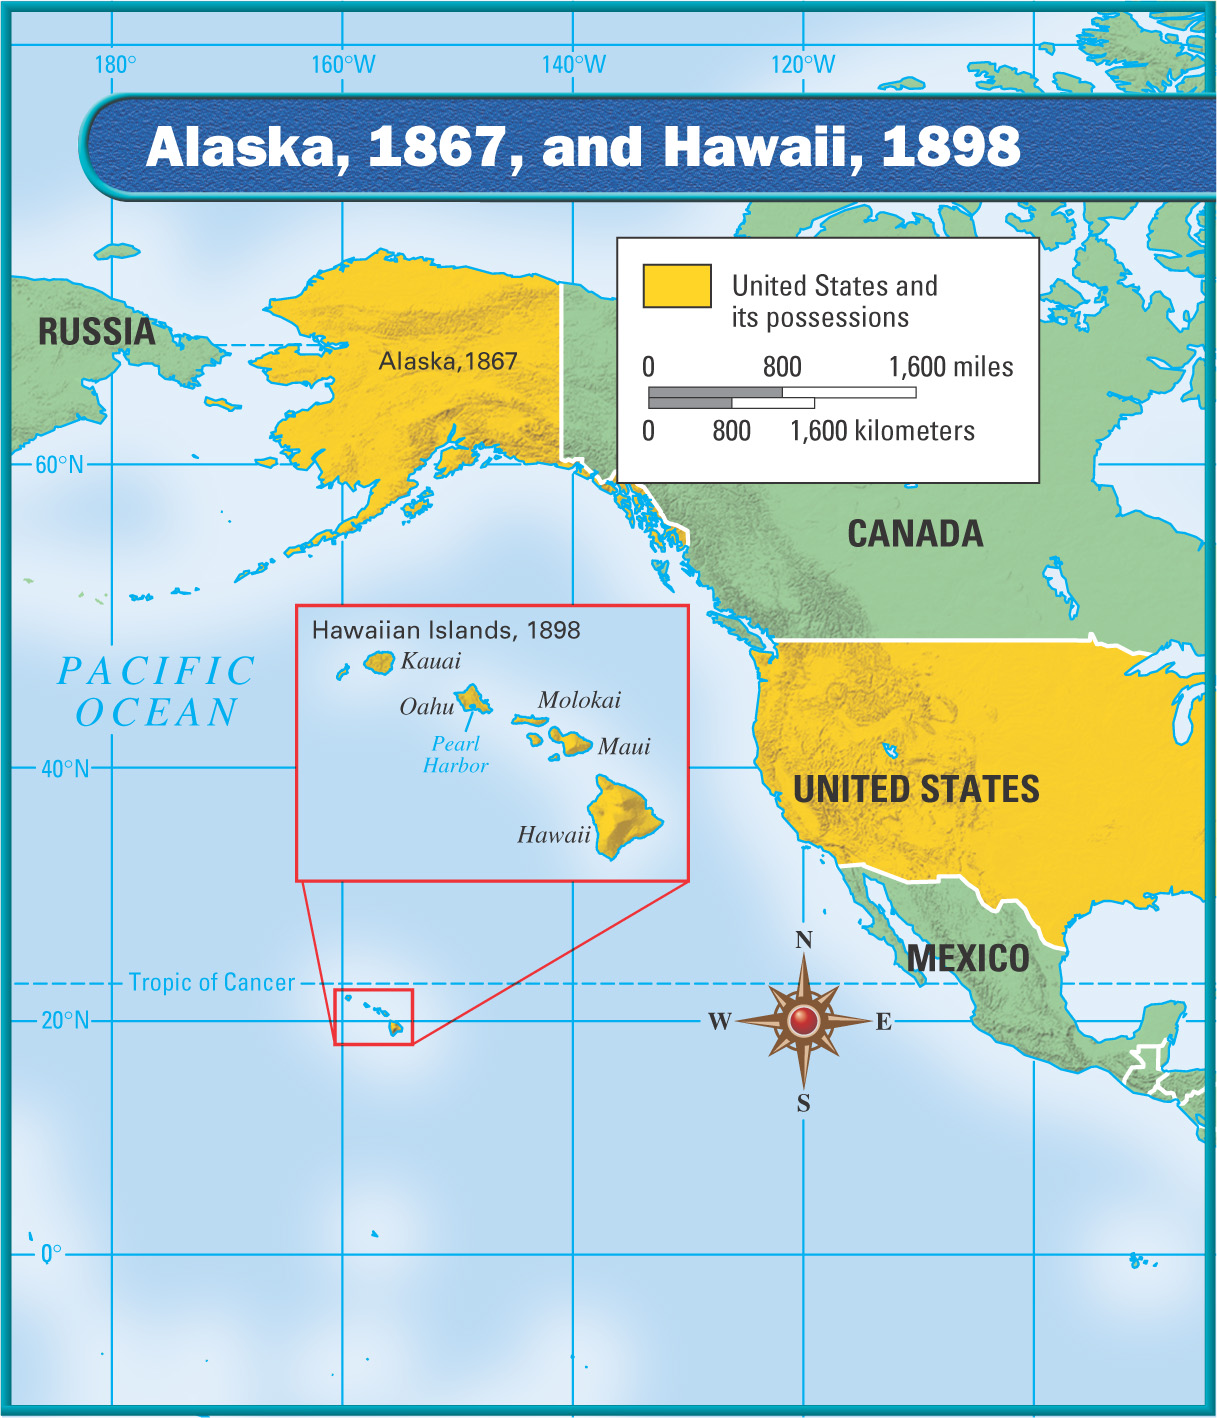 Map:  United States and its possessions, including Alaska and Hawaii